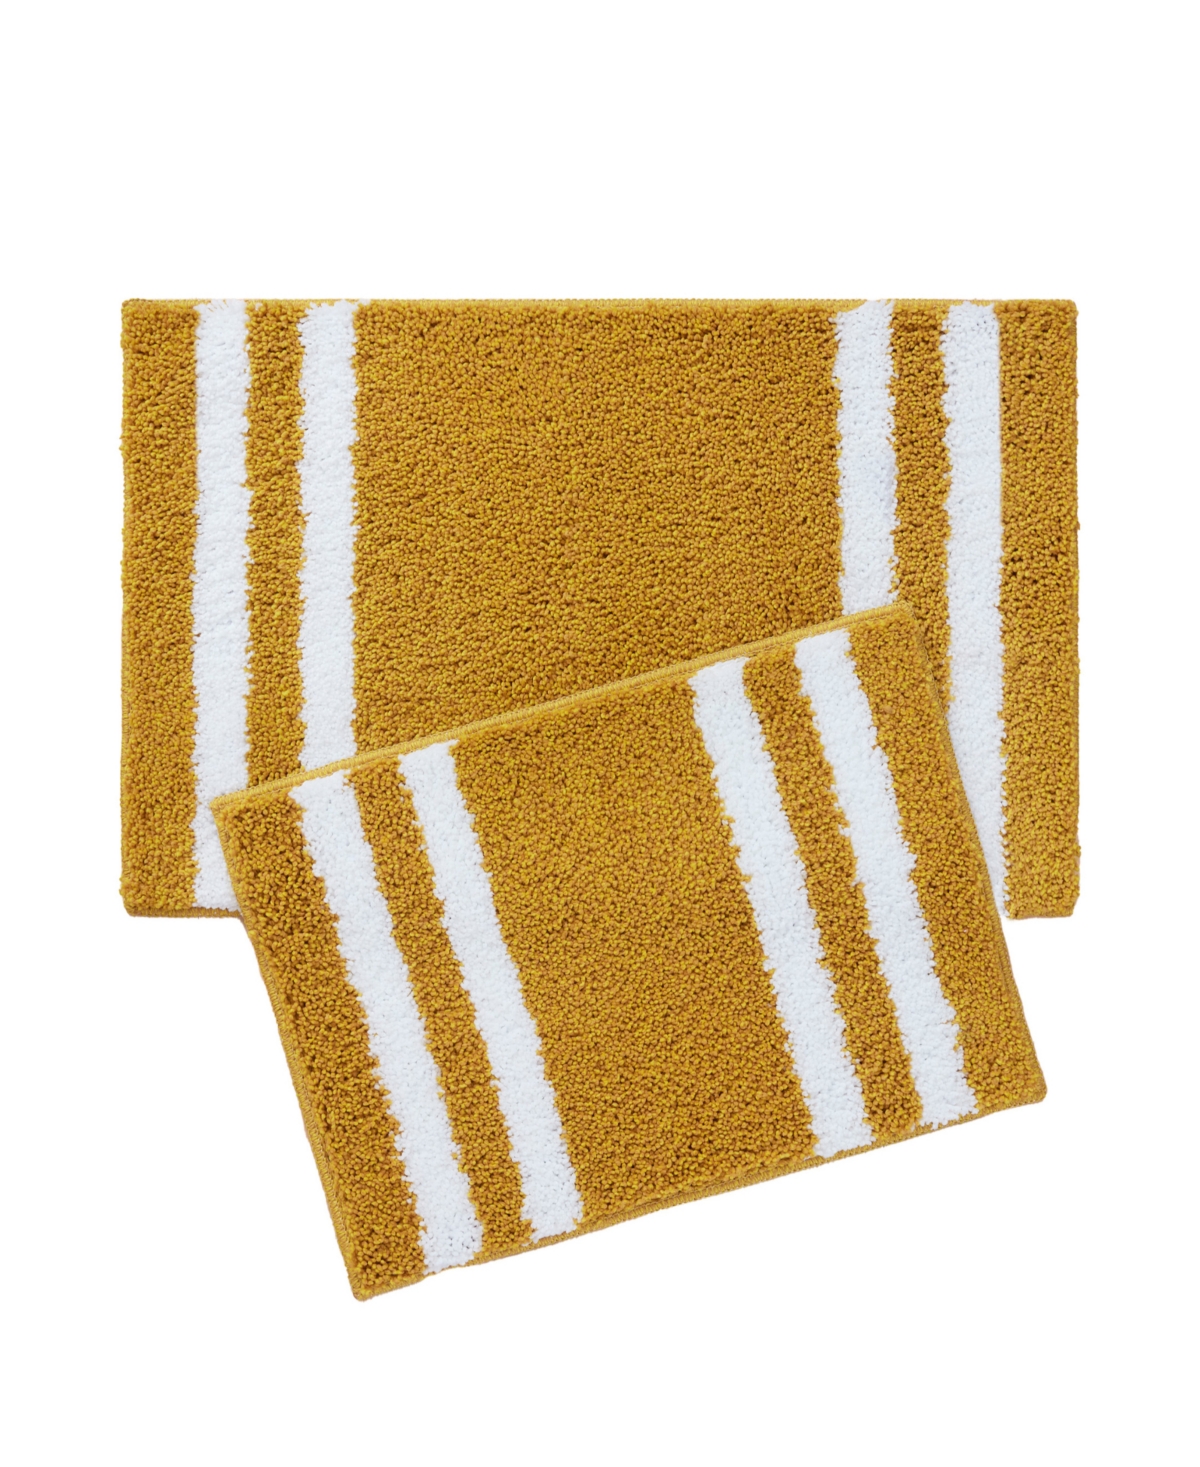 Lucky Brand Harden Striped Heathered 2-piece Bath Rug Set, 17" X 24" And 20" X 32" In Ochre Yellow